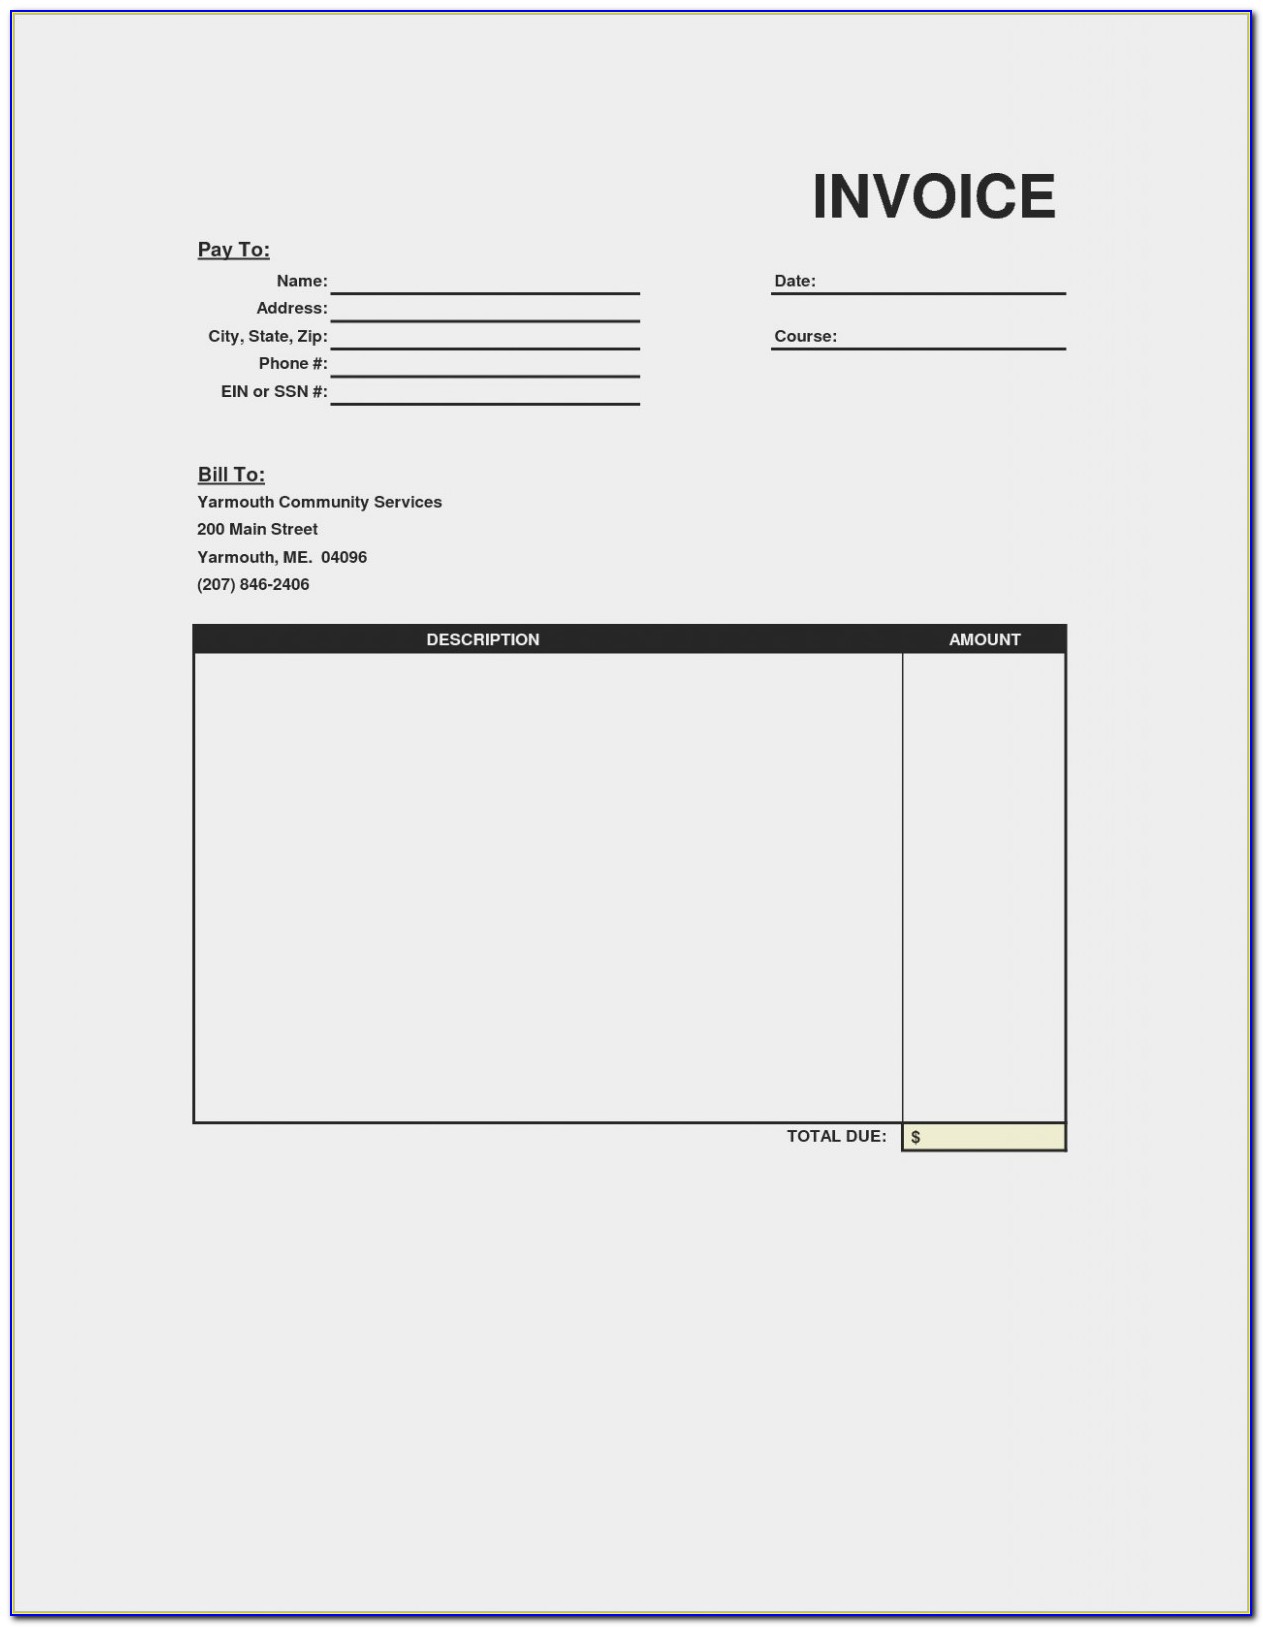 Catering Invoice Format In Excel